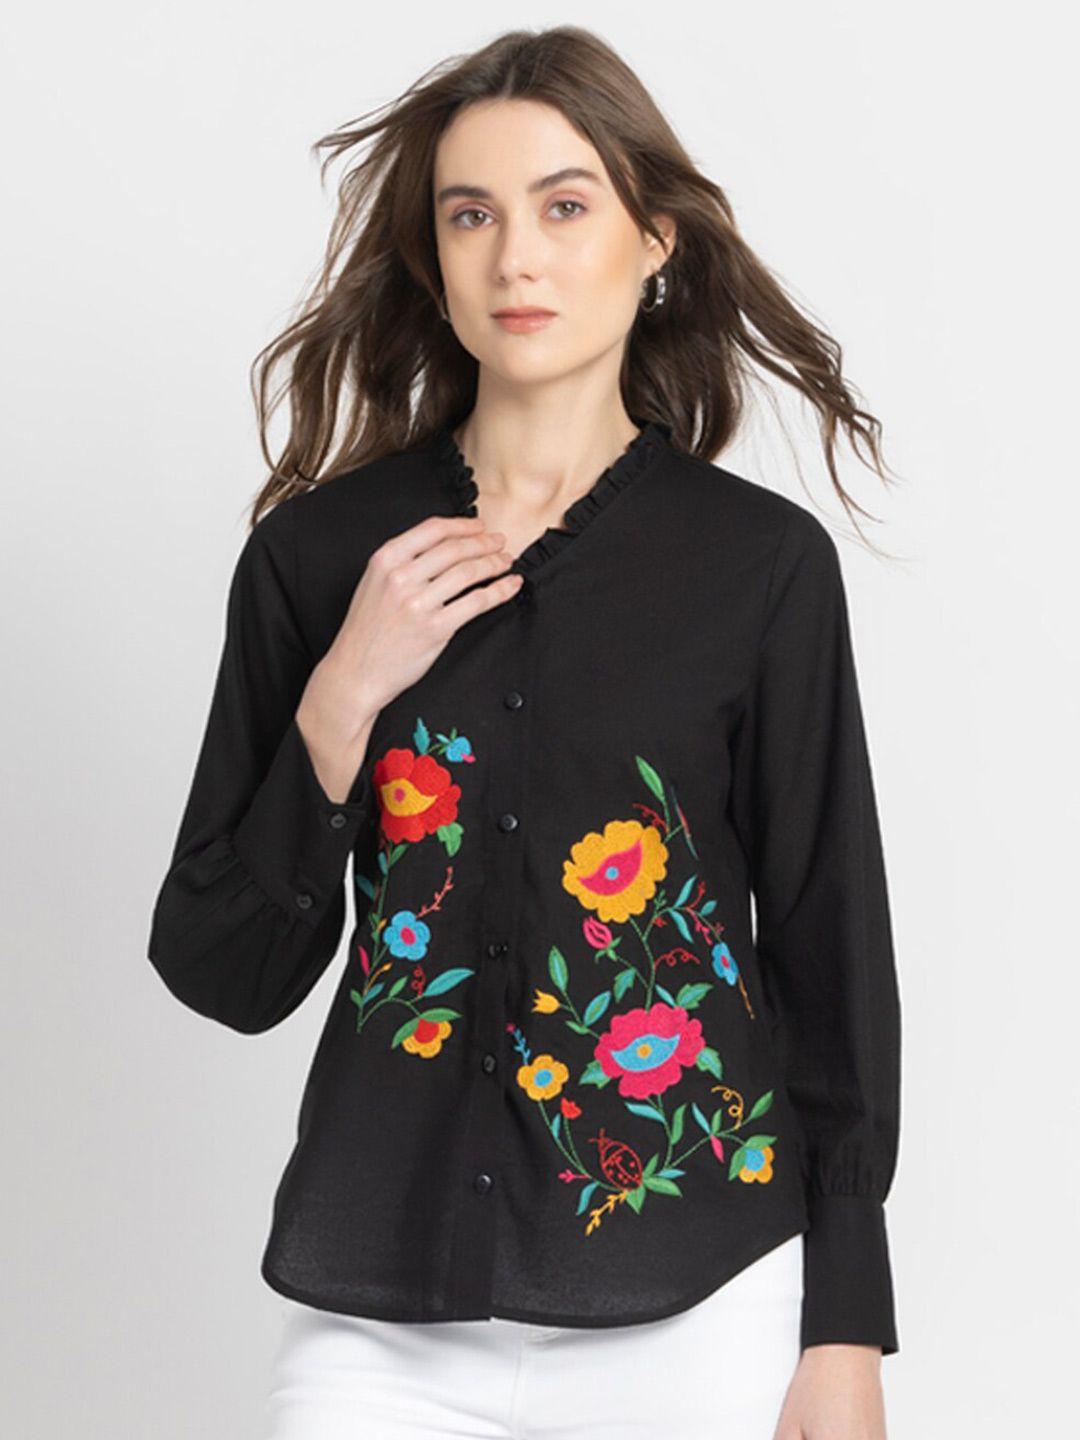 shaye-floral-embroidered-cuffed-sleeves-cotton-shirt-style-top